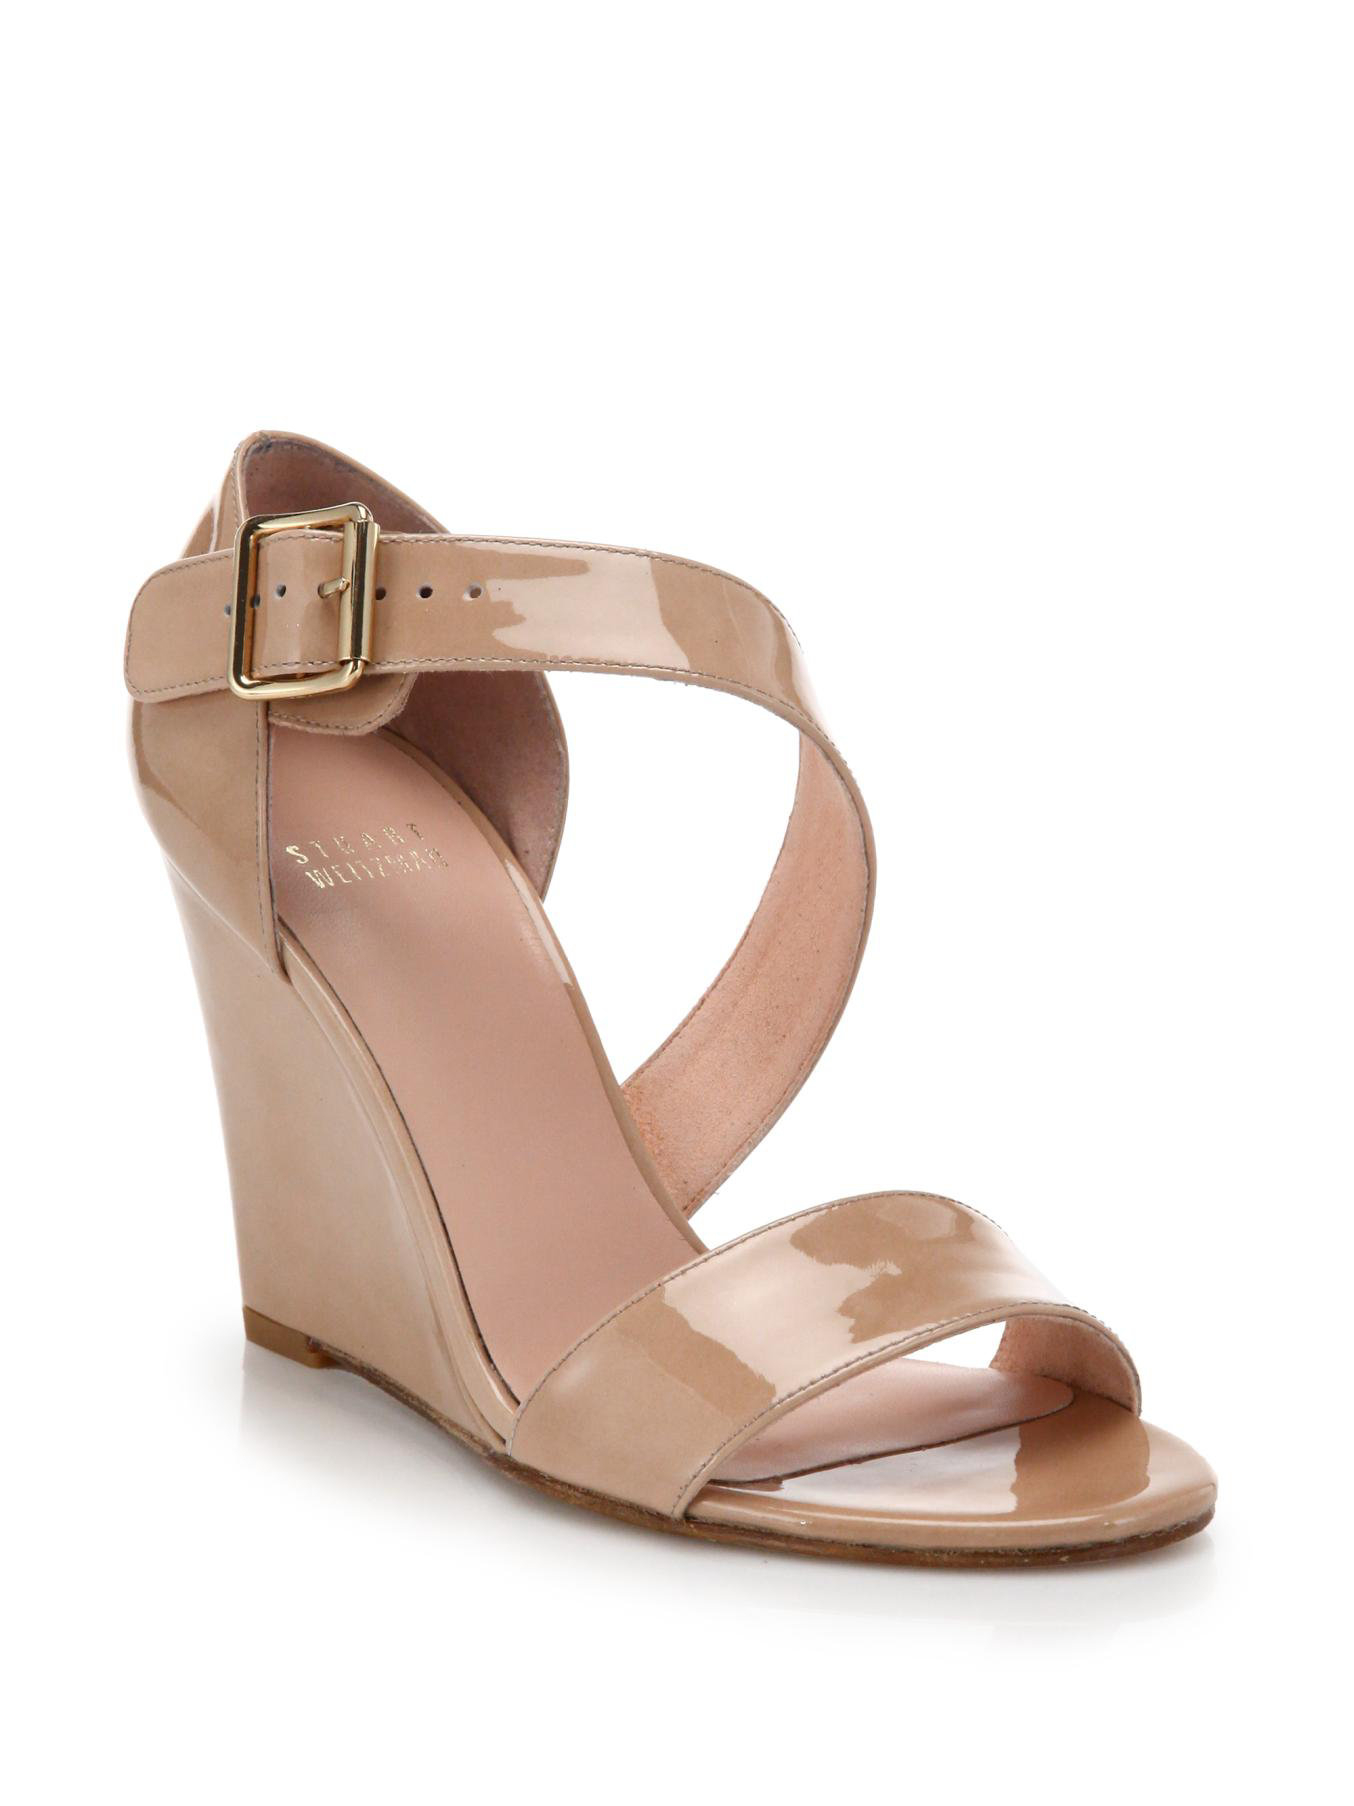 Stuart Weitzman Lineone Patent Leather Wedge Sandals in Nude (Natural) -  Lyst